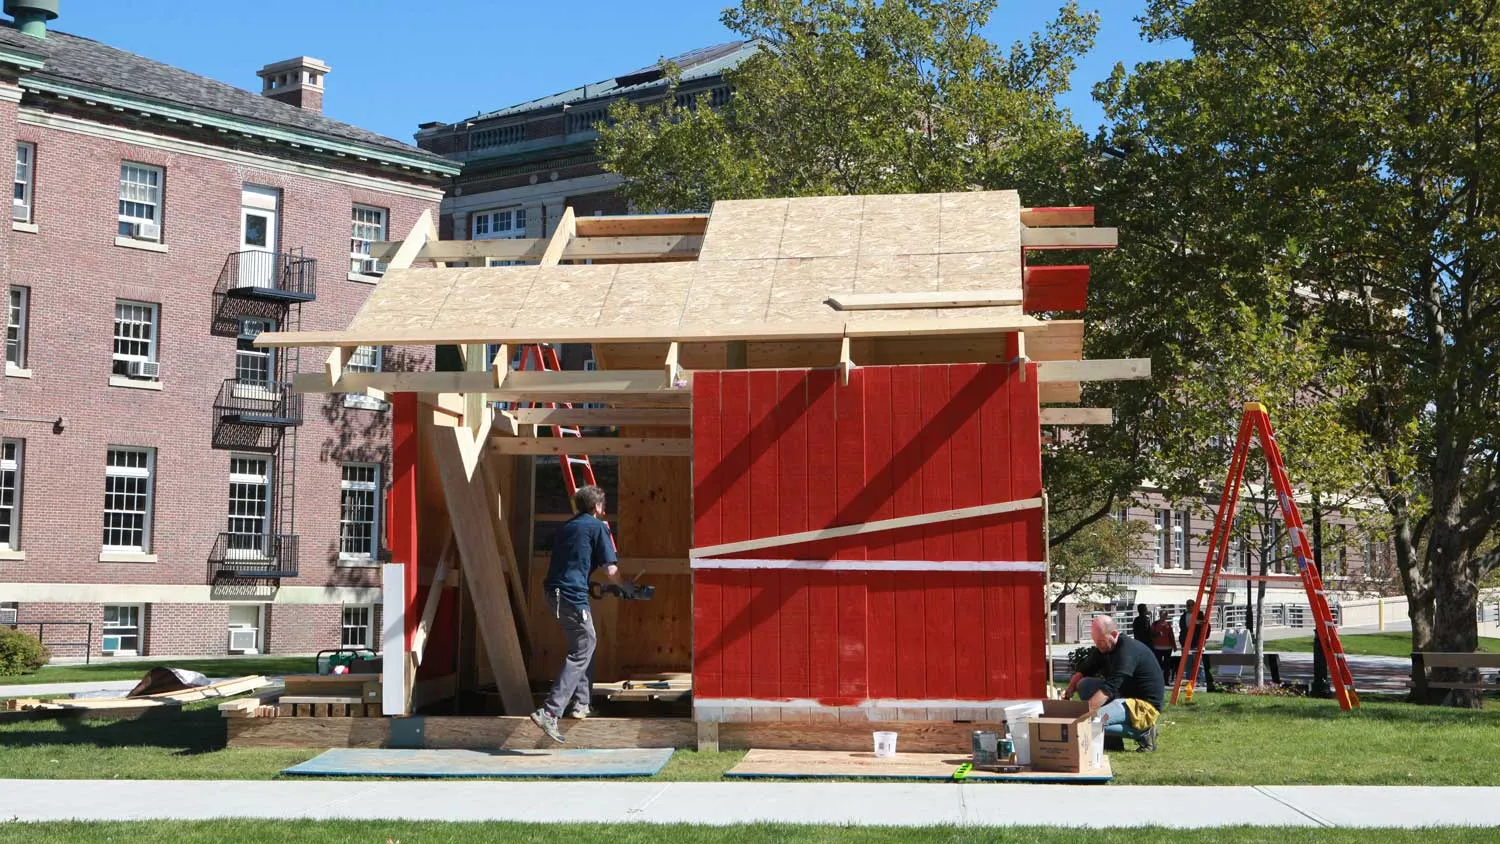 A red barn like structure in mid construction on the bustling RPI campus. 